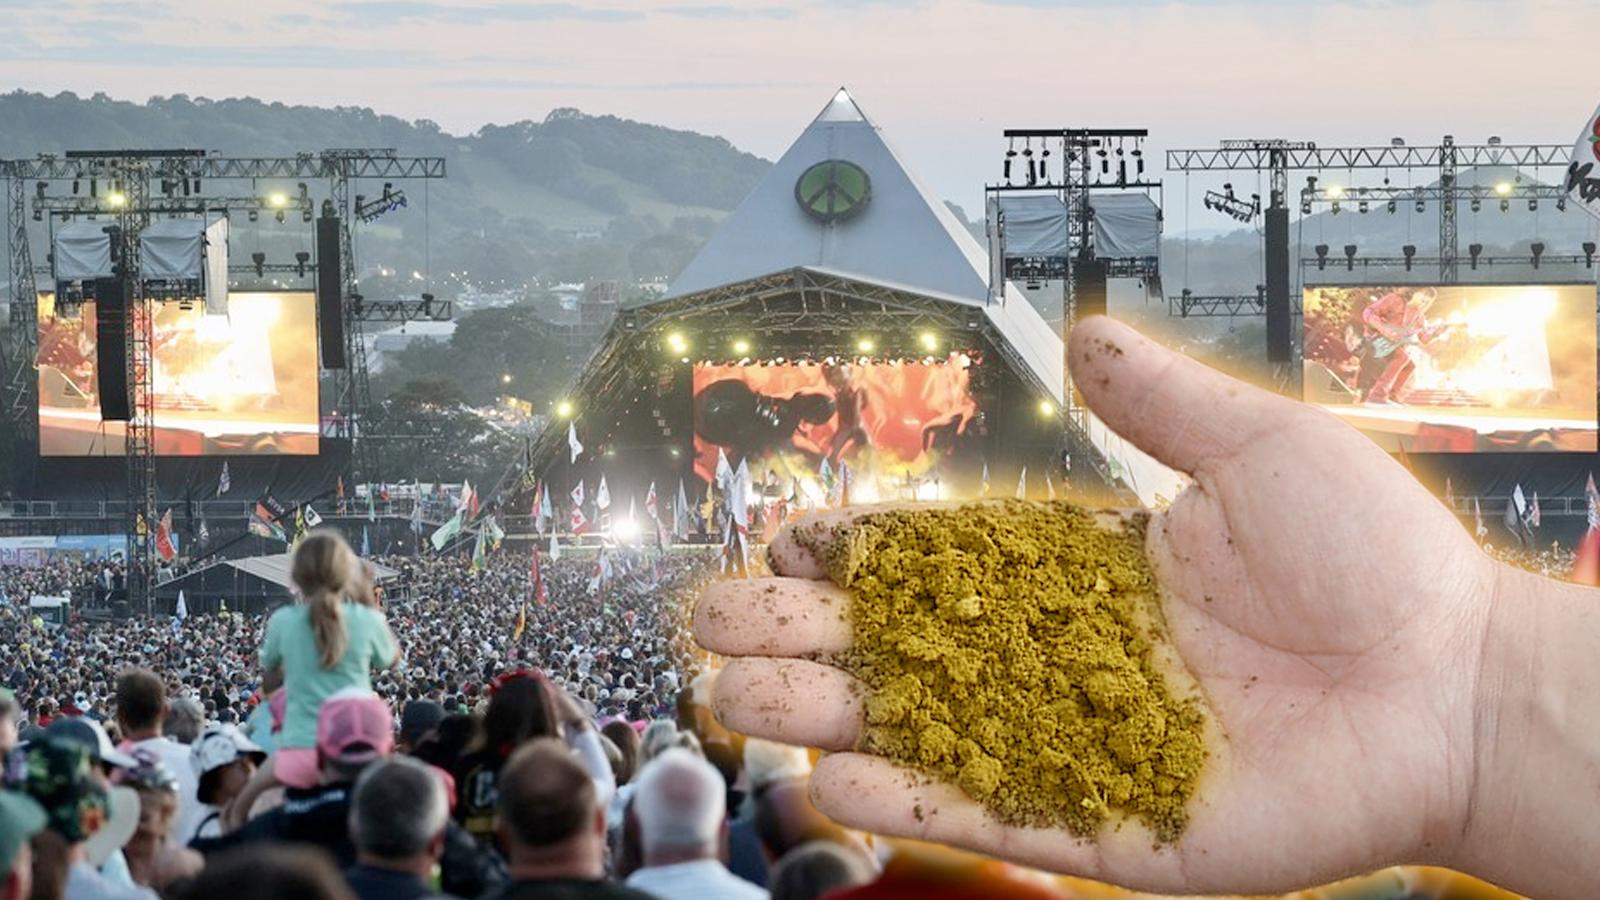 stock image of glastonbury's pyramid stage with a hand raised up with fertilizer colored yellow atop